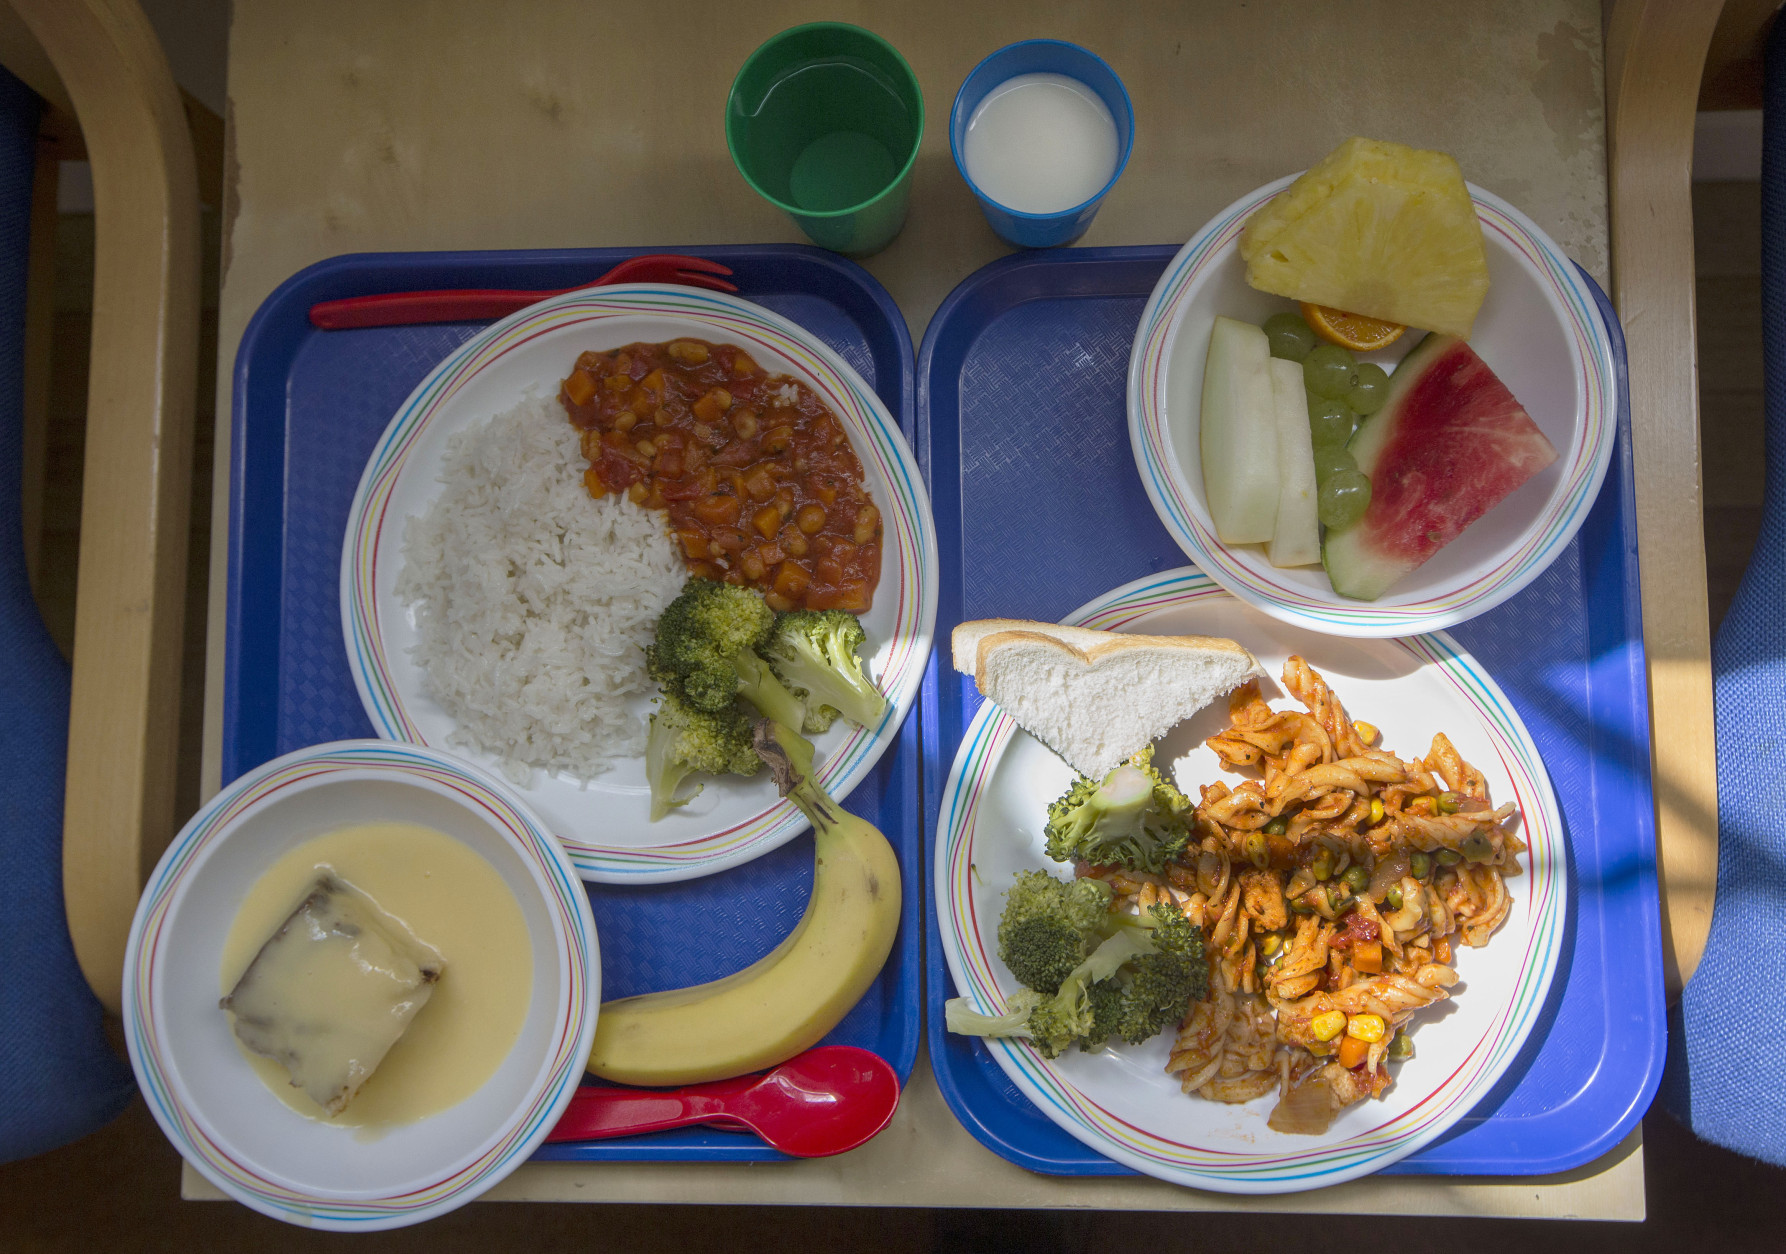 Blue-haired lunch lady wins hearts with her tasty school lunches - wide 8